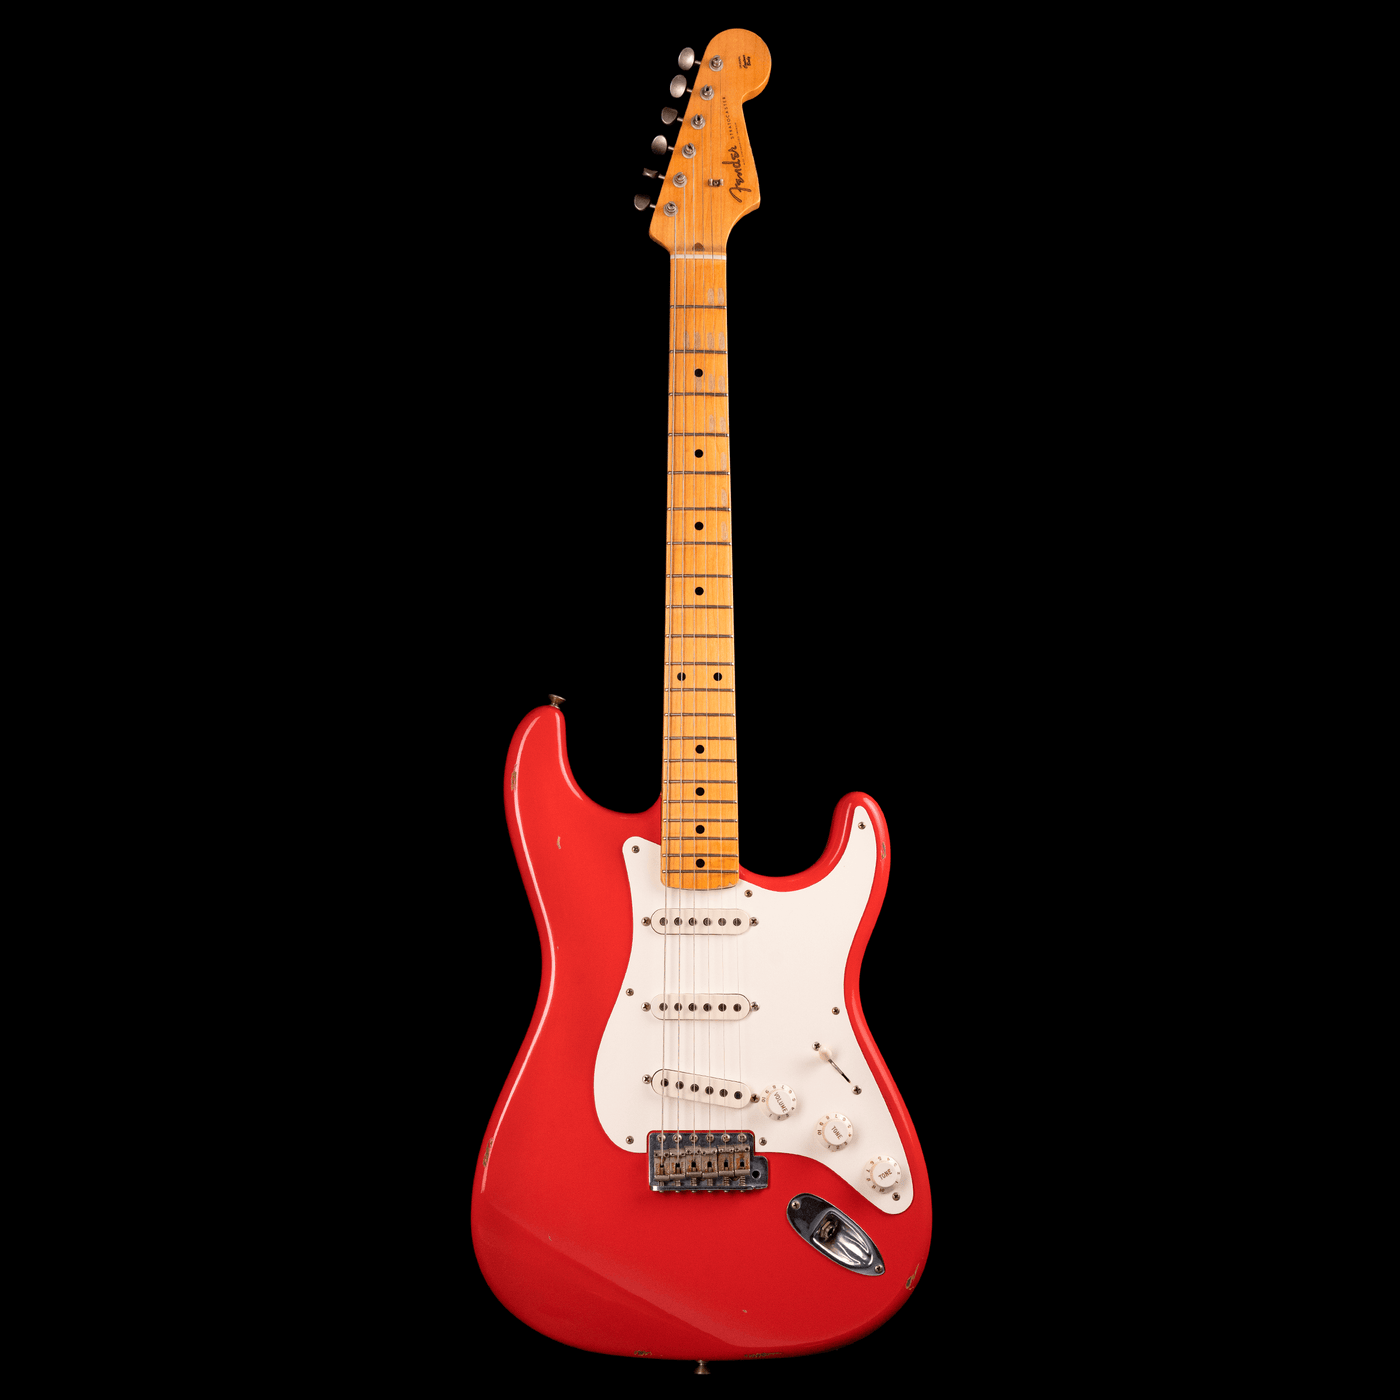 Fender Custom Shop Stratocaster Fiesta Red '56 Soft Relic 2011 - $4599990 - Gearhub - The Fender Stratocaster is probably the most iconic guitar ever produced and the Fender Custom Shop '56 Stratocaster is a fitting addition to this legendary line.The Alder body is finished in a classic Fiesta Red nitro lacquer, period correct, this finish will wear beautifully with time and develop its own character even further. It also allows the natural resonance of the body to sing and sustain much more effectively com